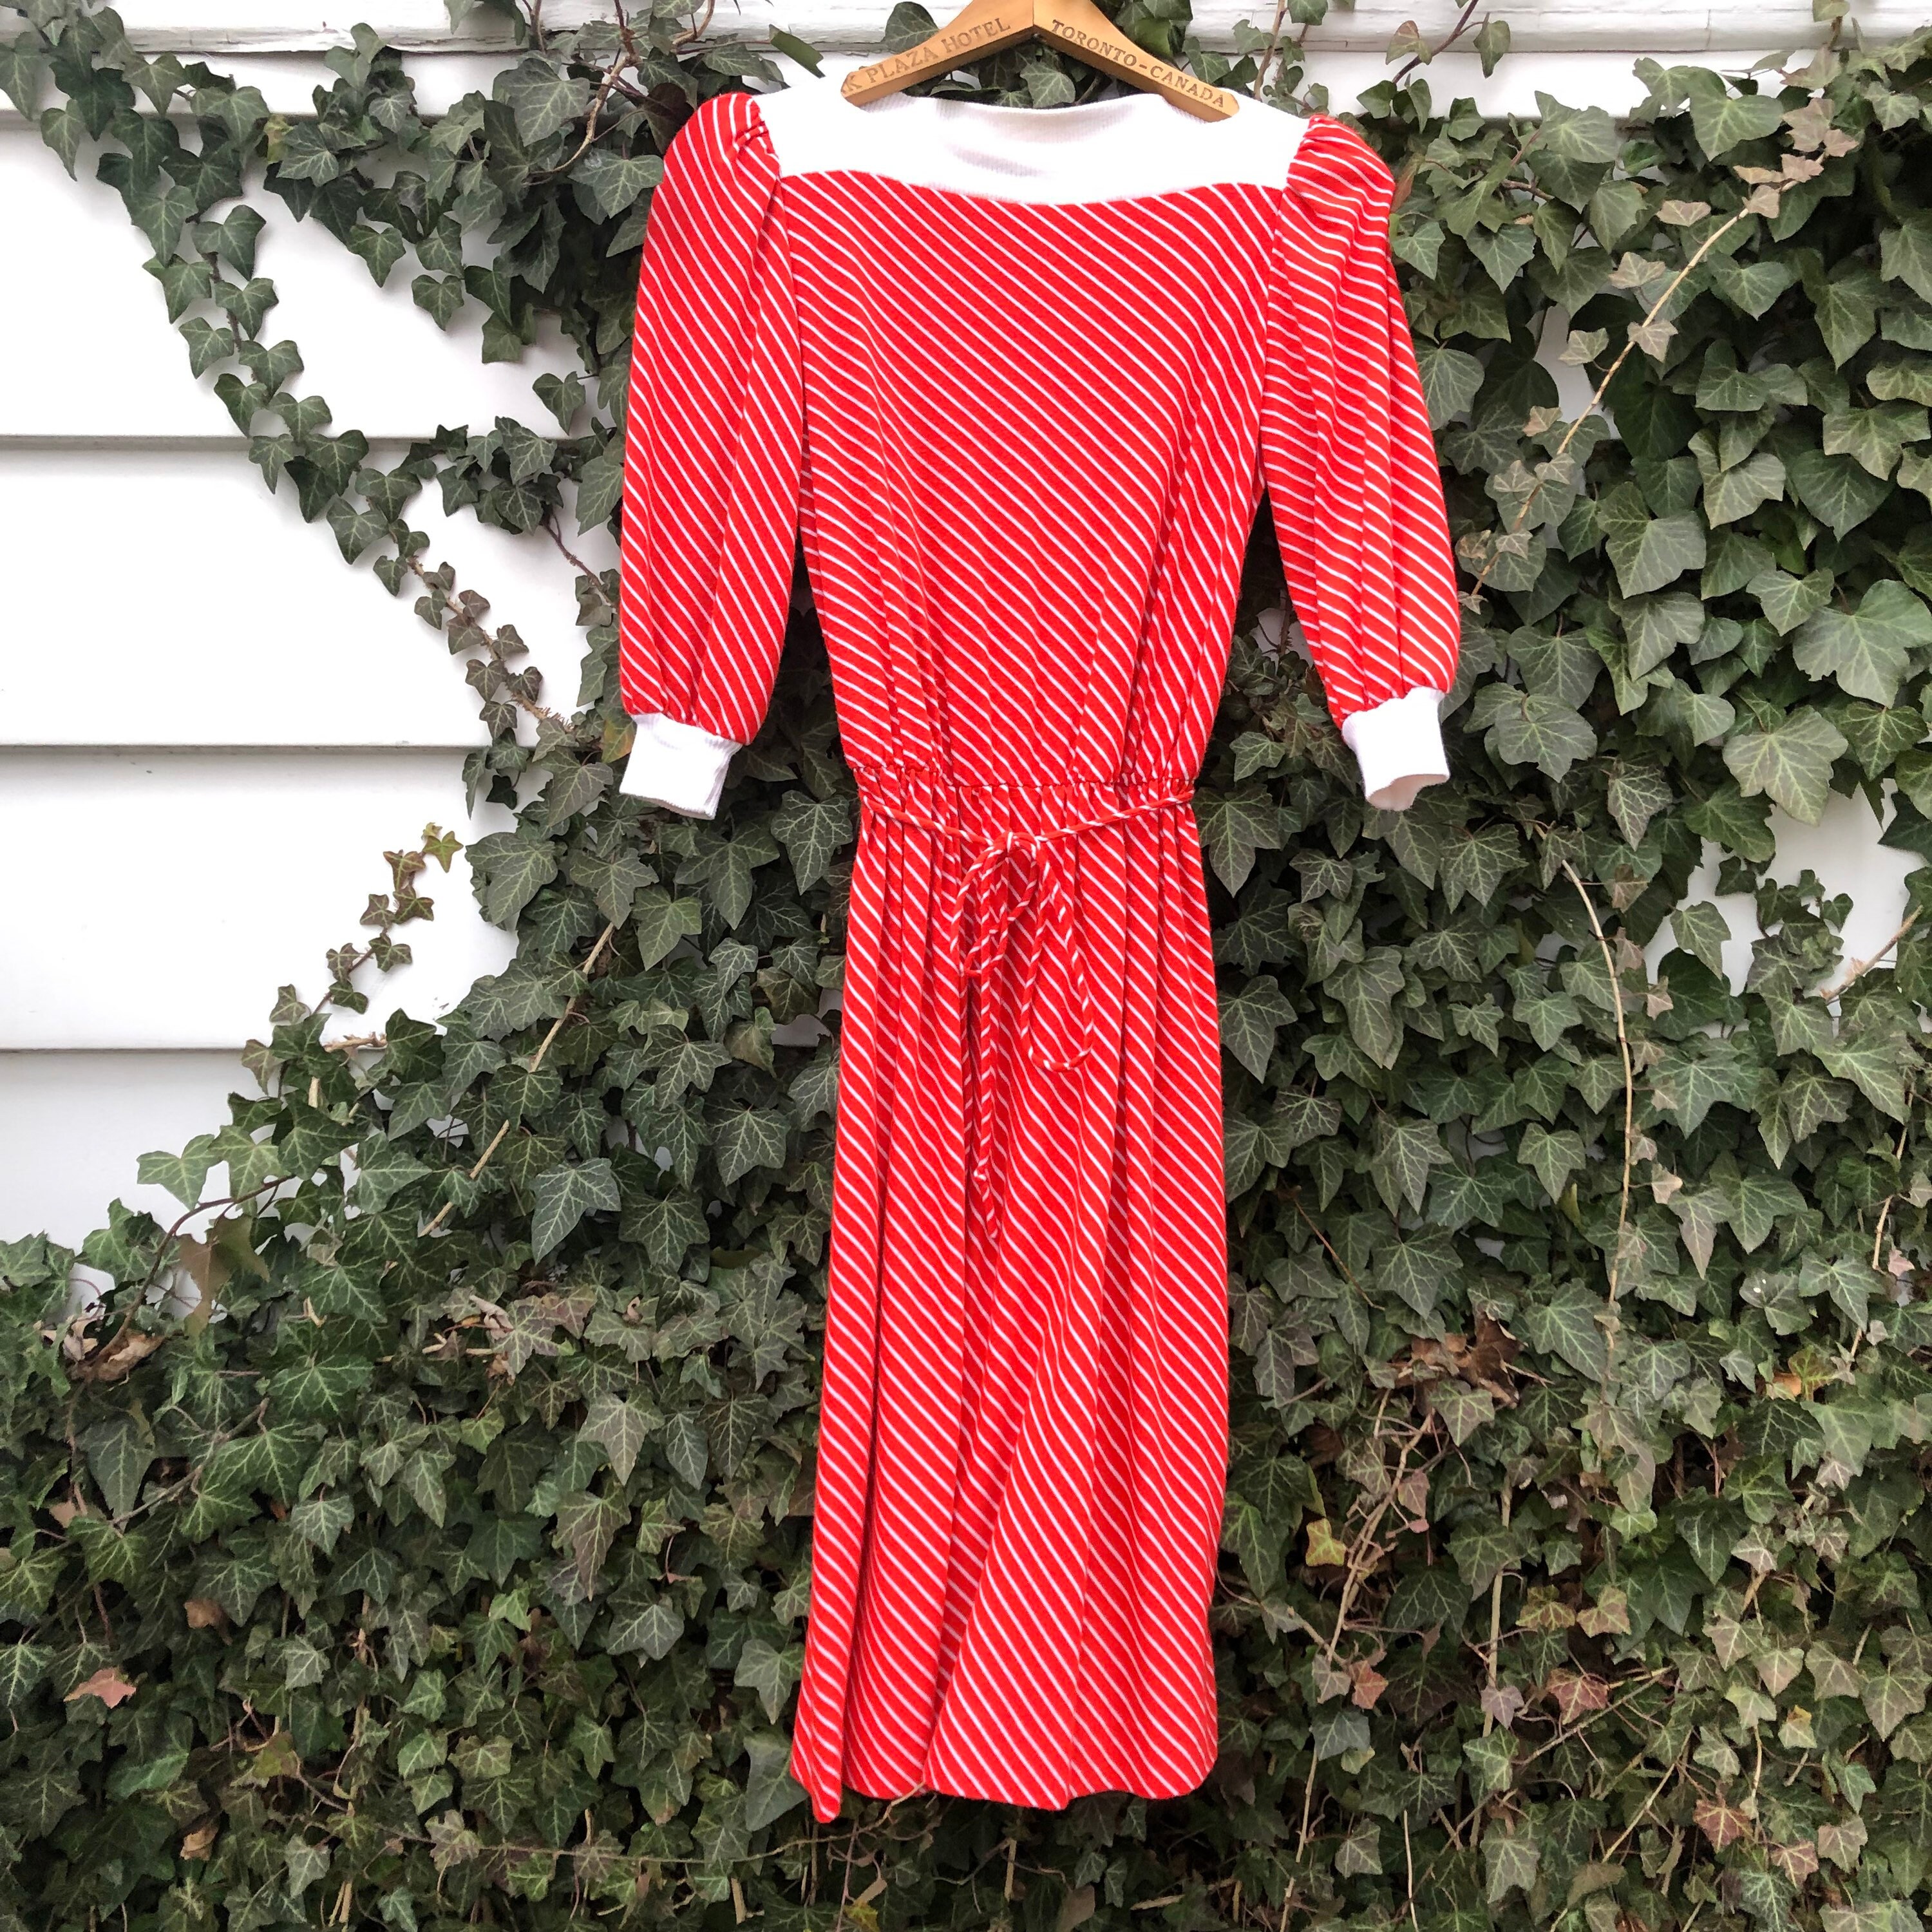 Vintage Jersey Cotton Comfy Red and White Striped Dress. Free - Etsy Israel